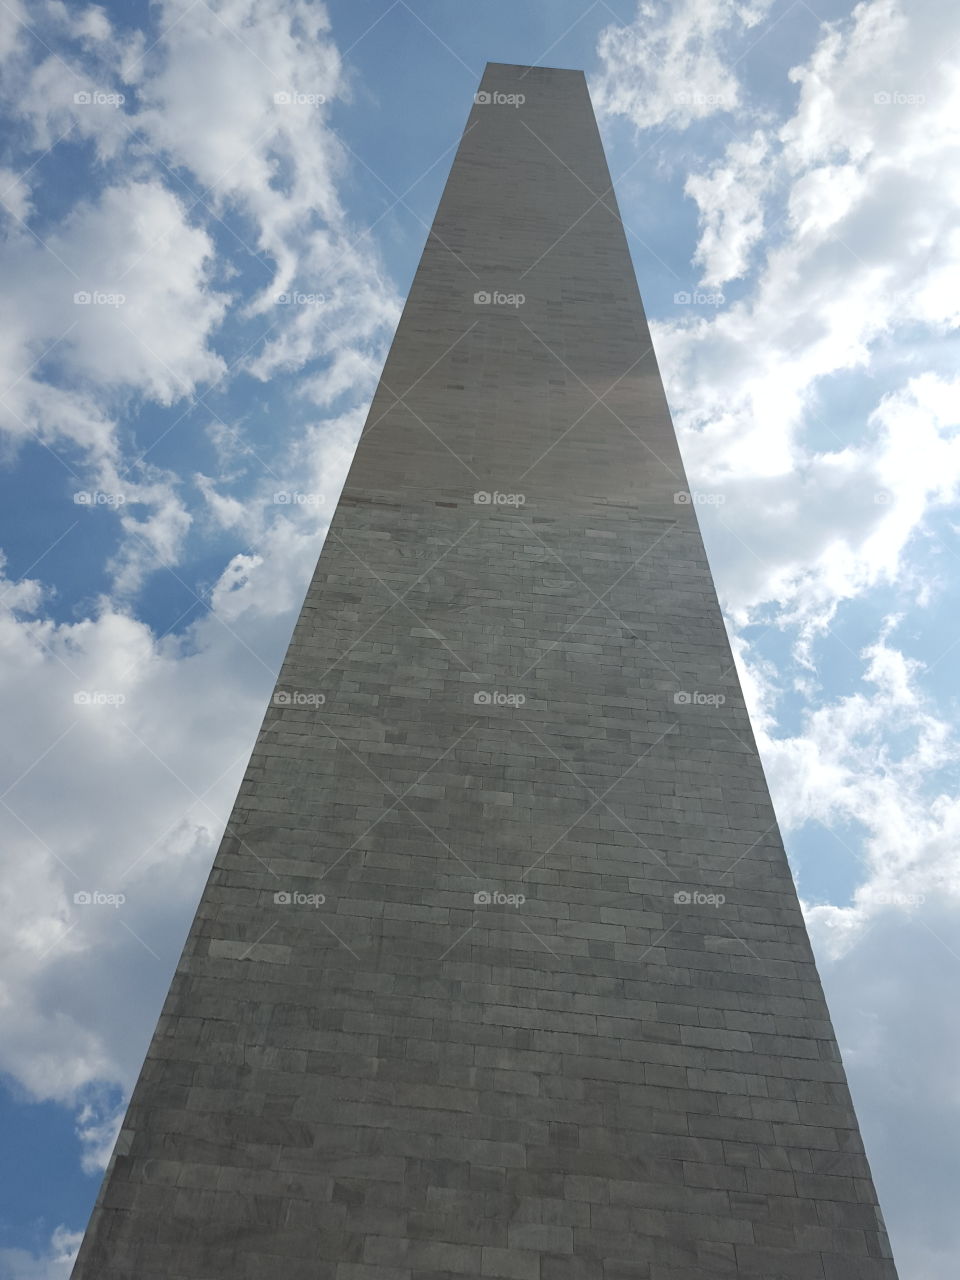 Washington Monument. our visit to D.C. on this beautiful day.